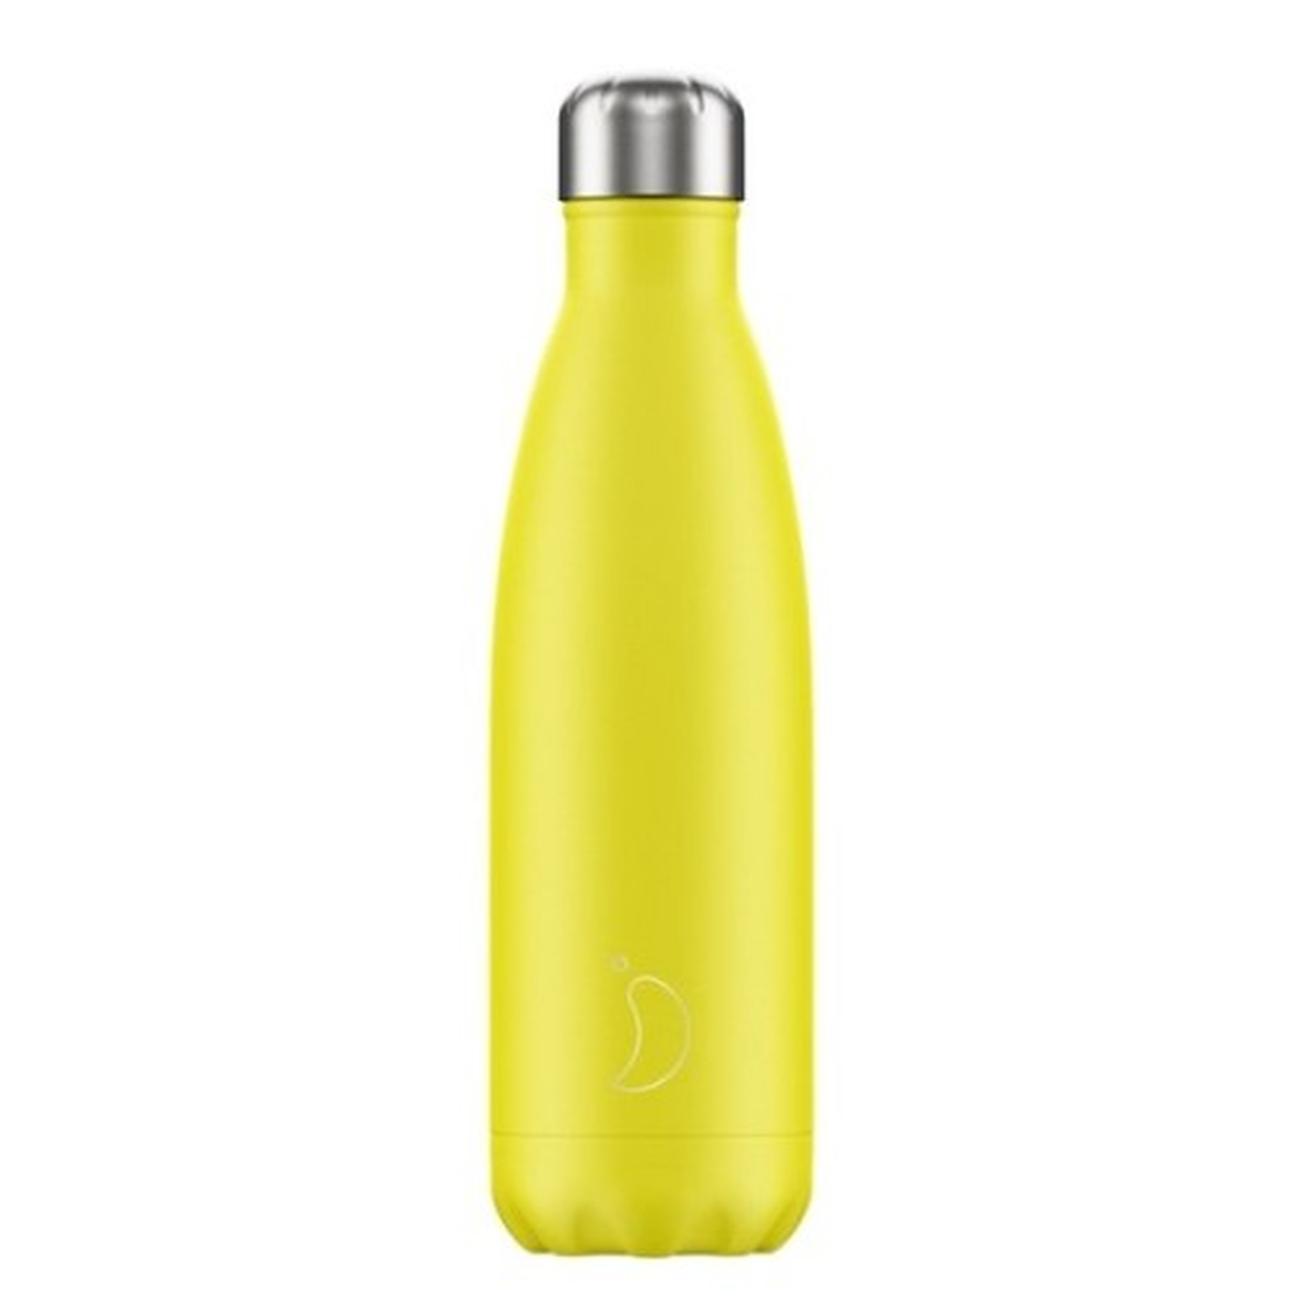 chillys-500ml-water-bottle-neon-yellow - Chilly's 500ml Water Bottle Neon Yellow